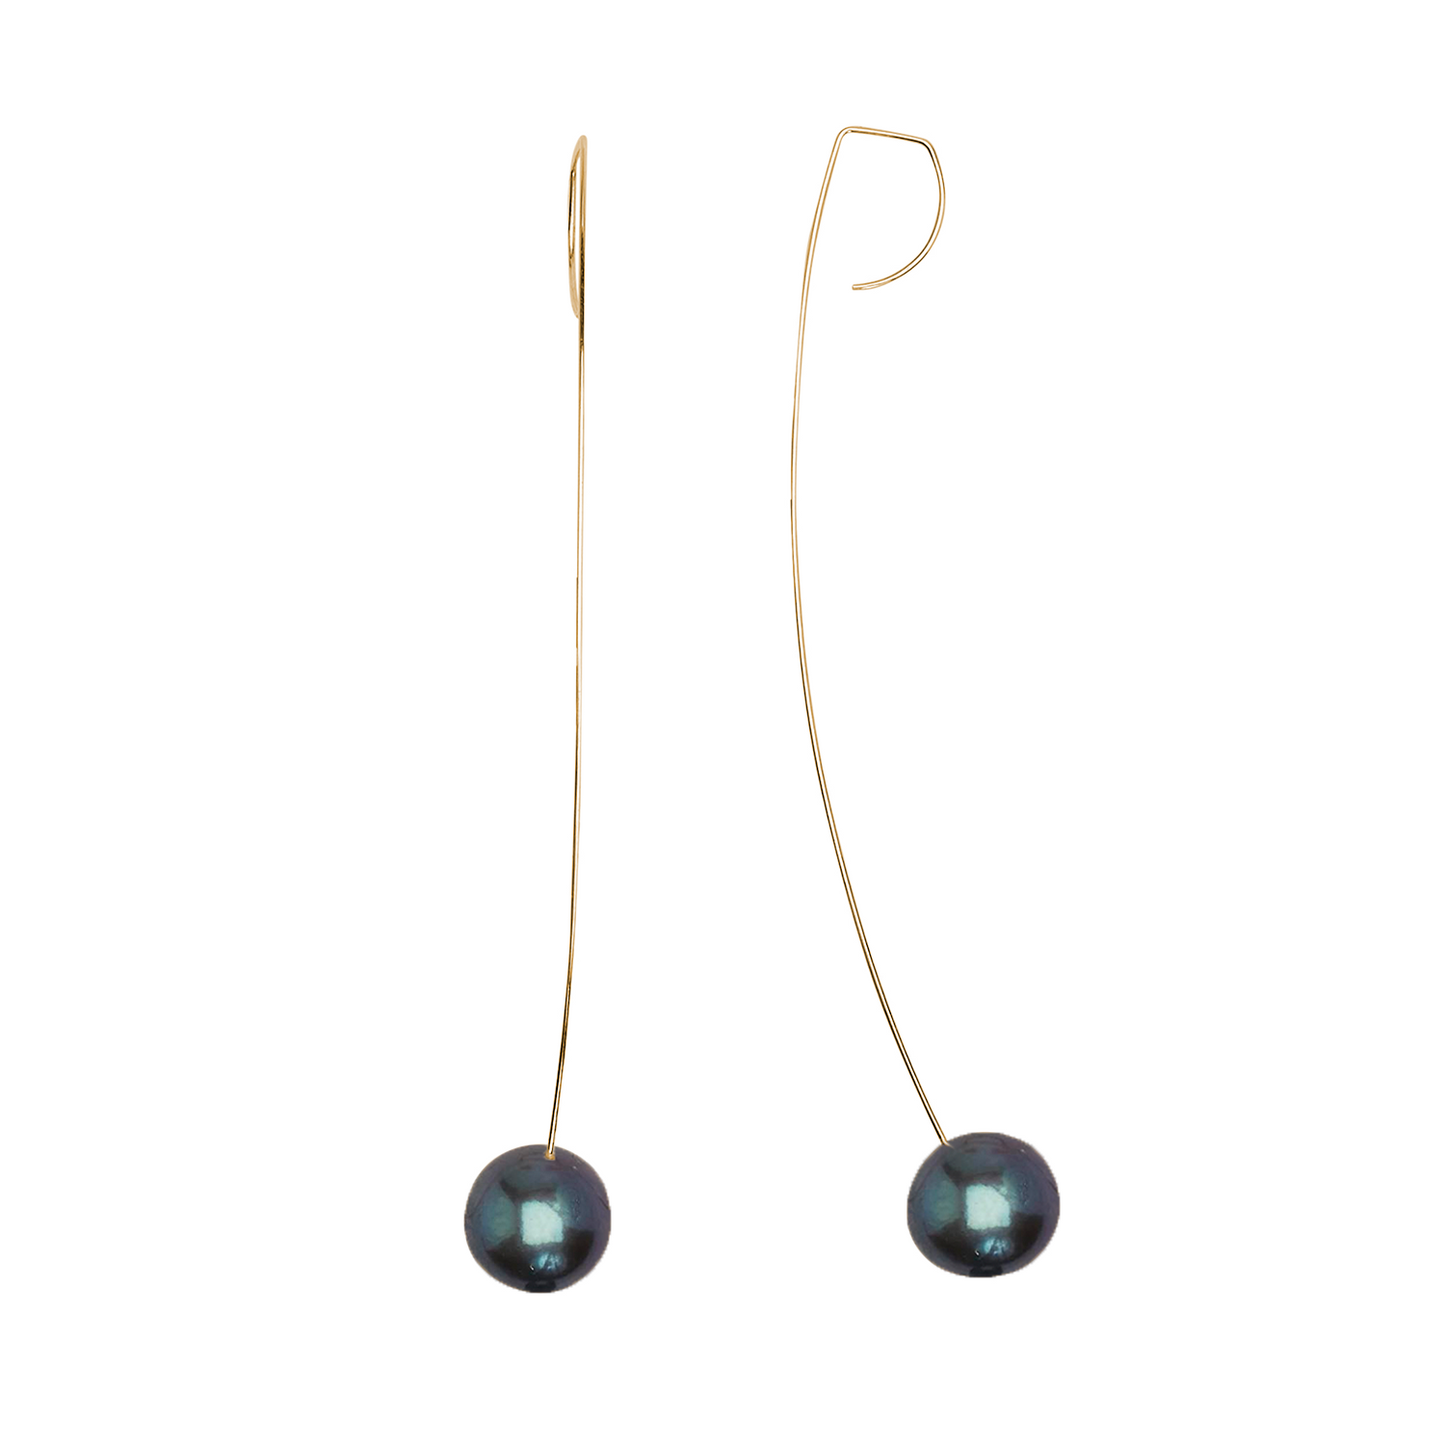 Long Curved Drop Earrings with Round Freshwater Pearls